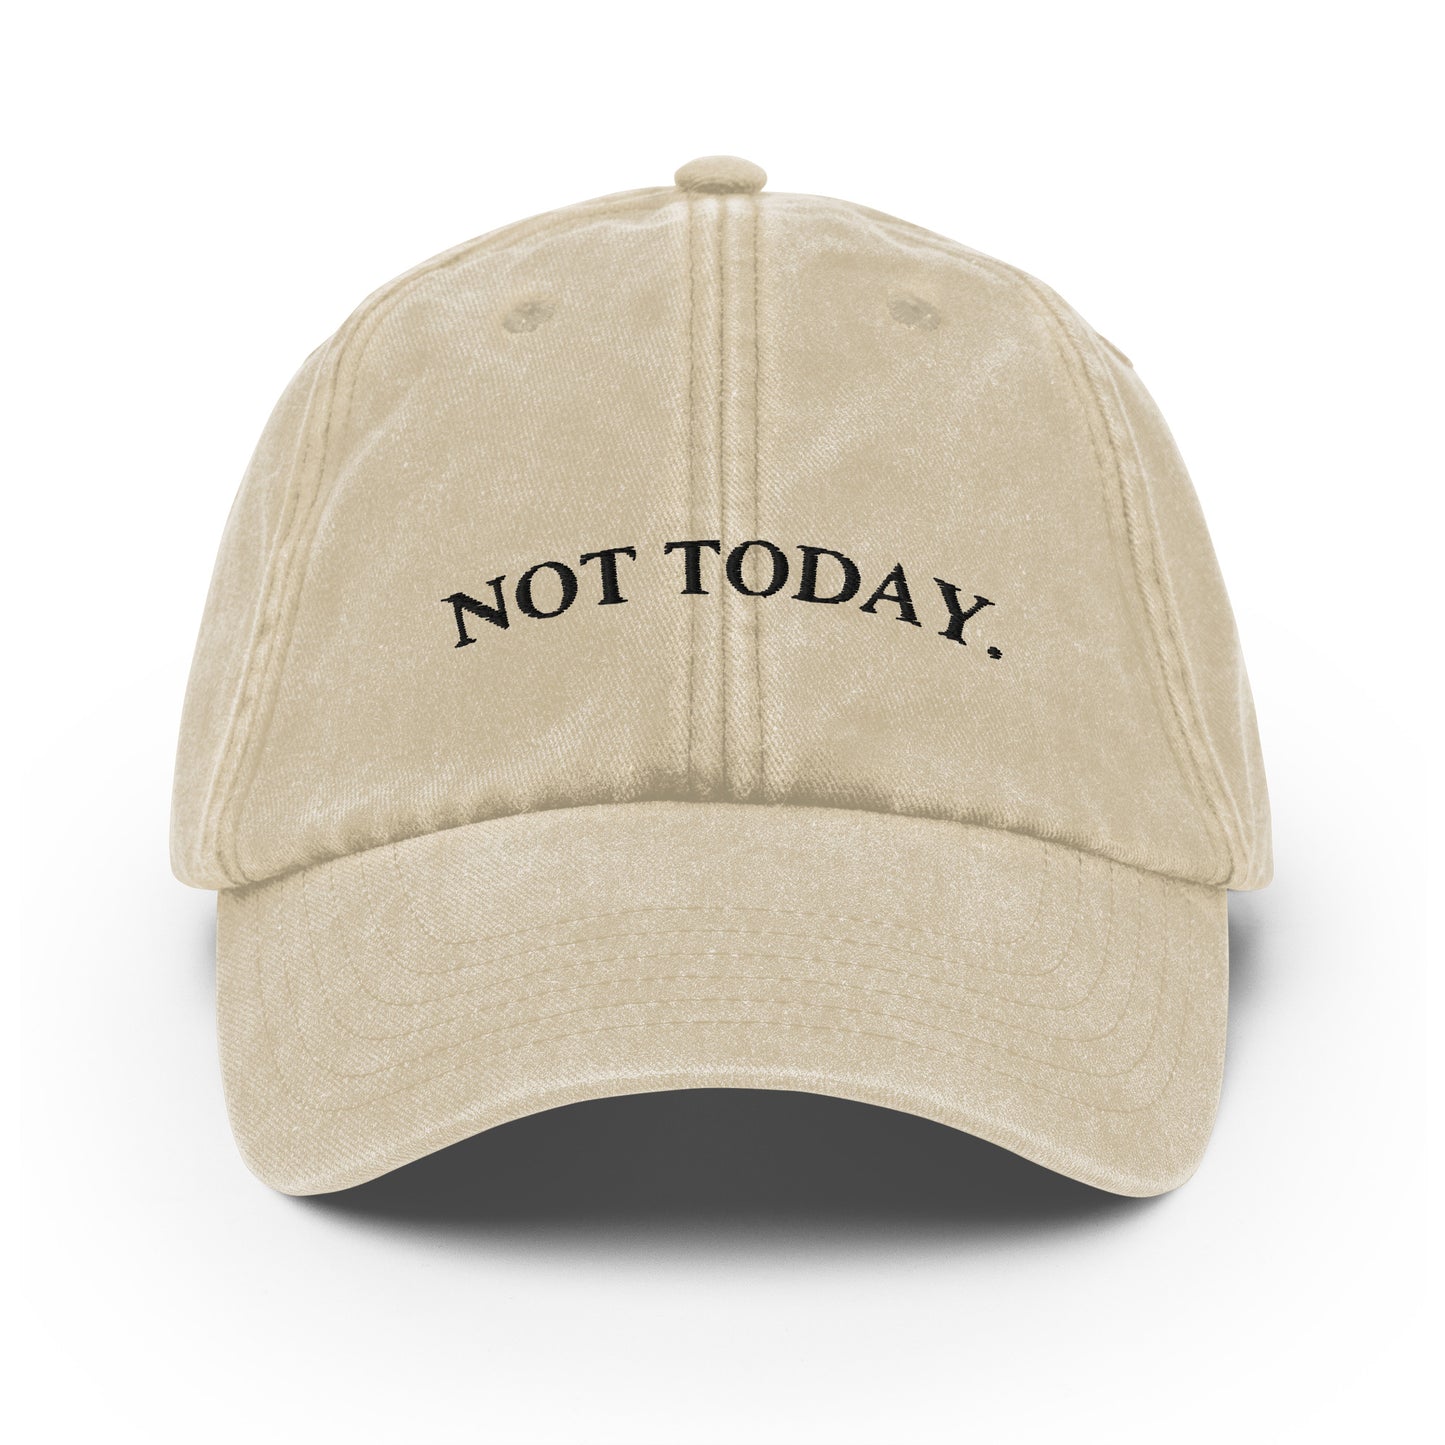 NOT TODAY Vintage Hat